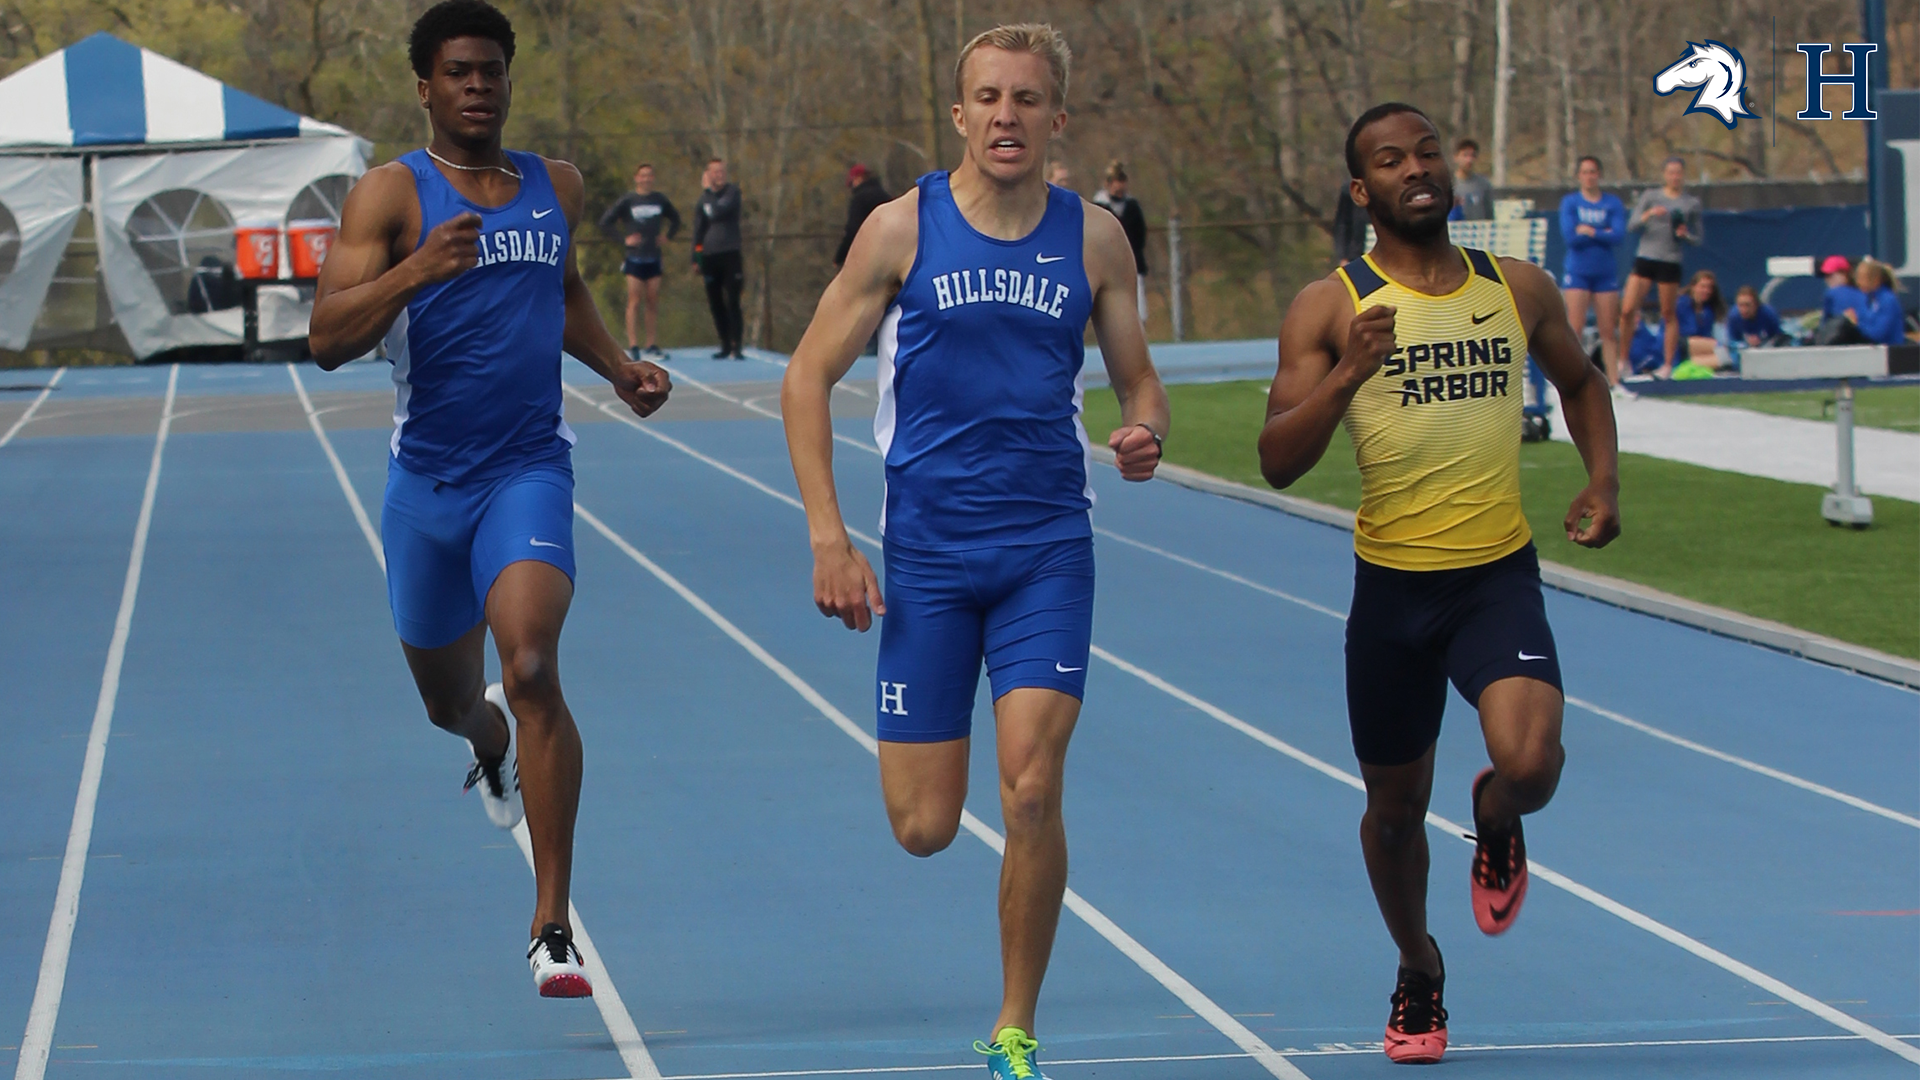 Chargers' Ian Brown sets school hurdle record to highlight GINA Relays for Hillsdale men